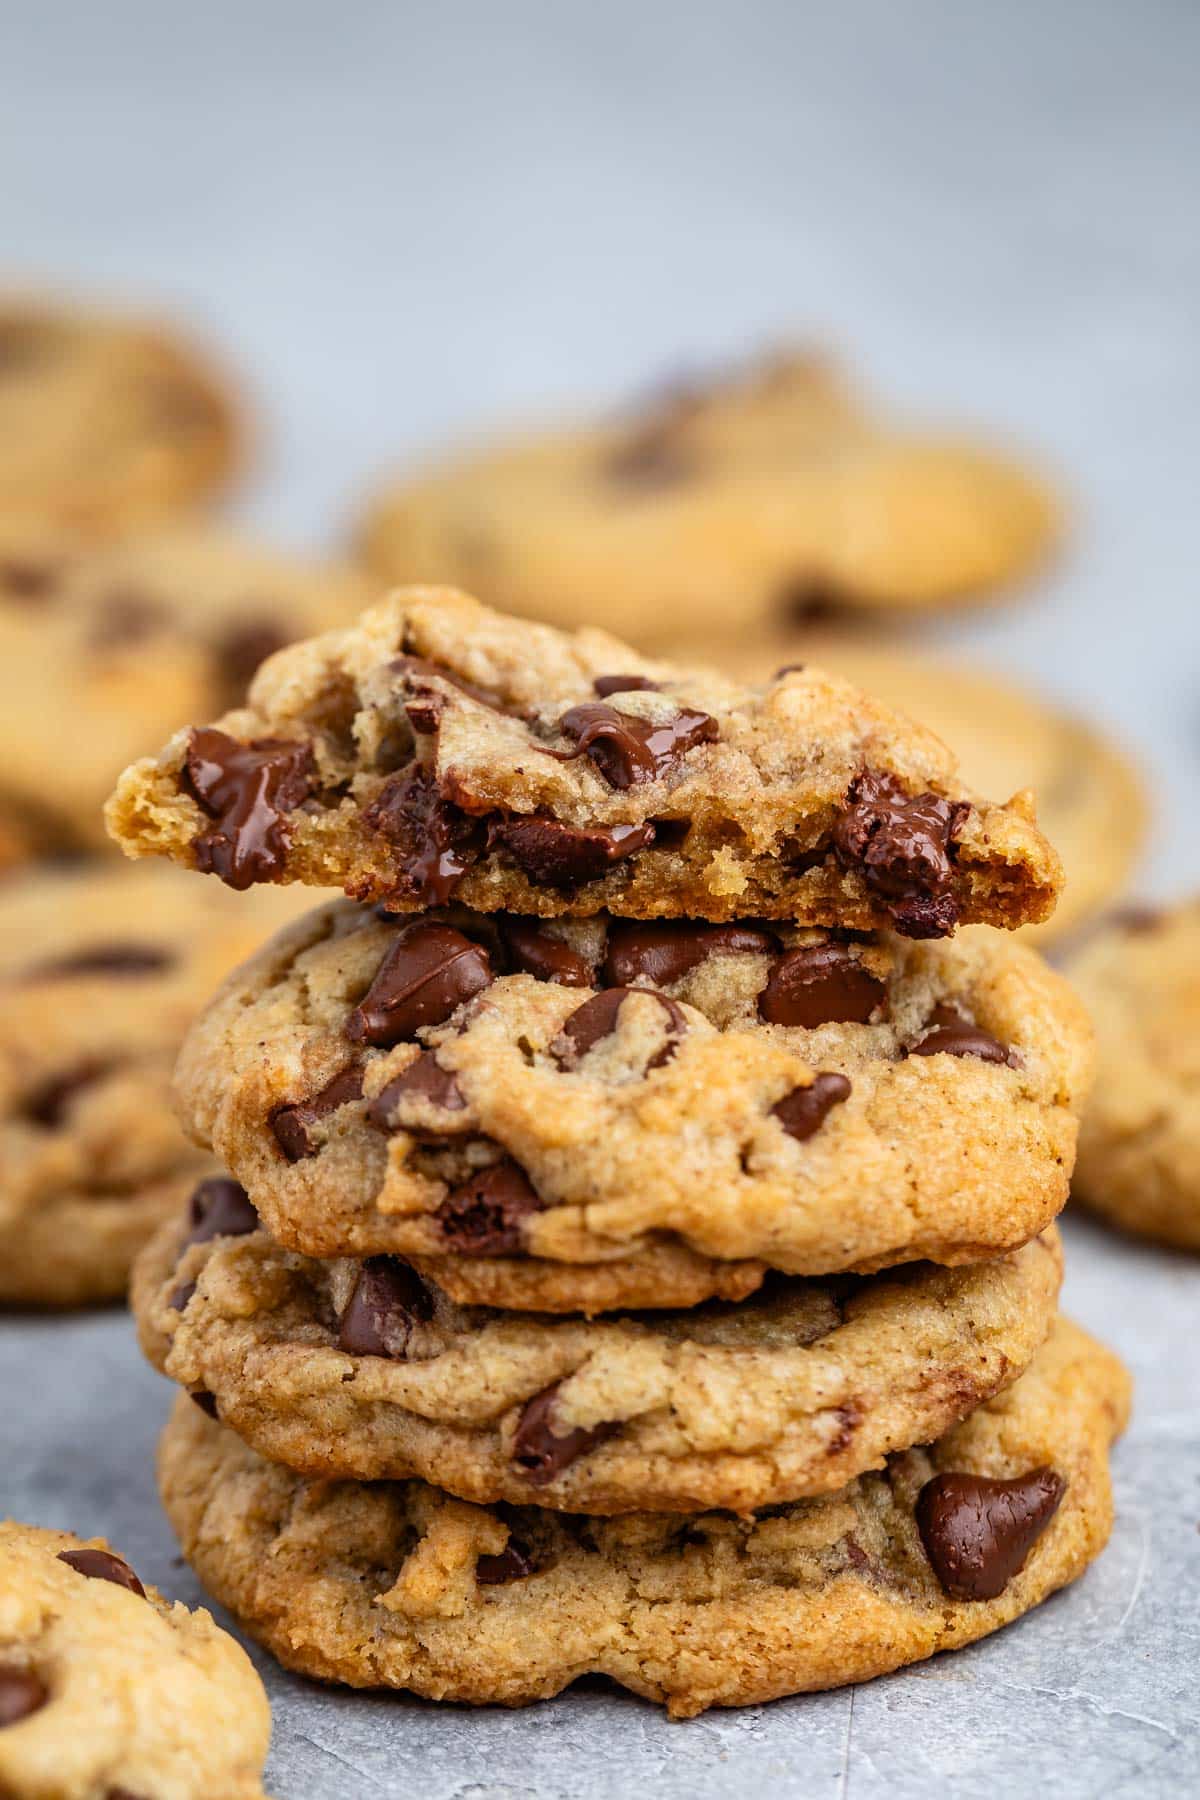 chocolate chip cookies with chocolate chips baked into the center.